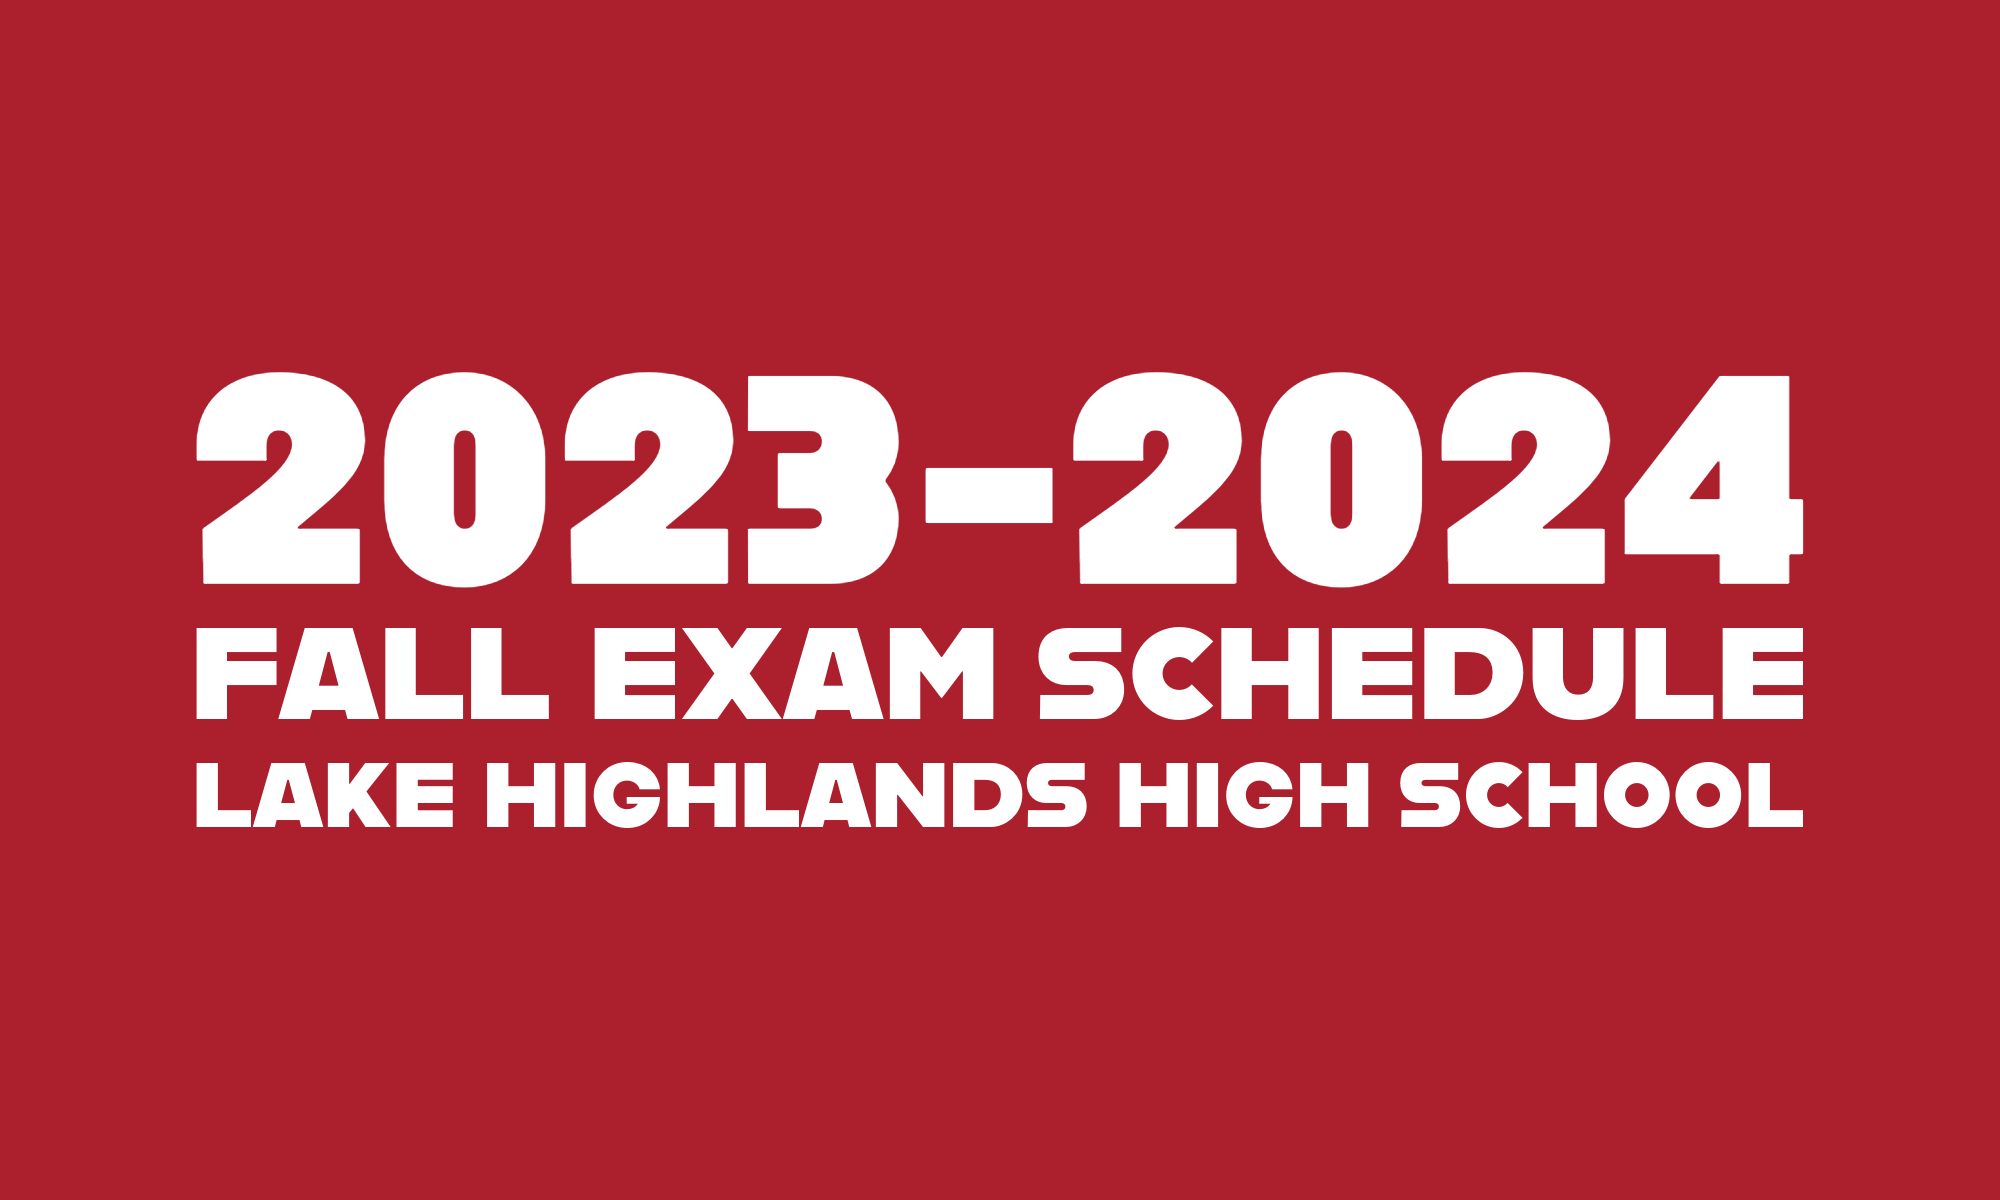 LHHS Fall Exam Schedule Featured Image